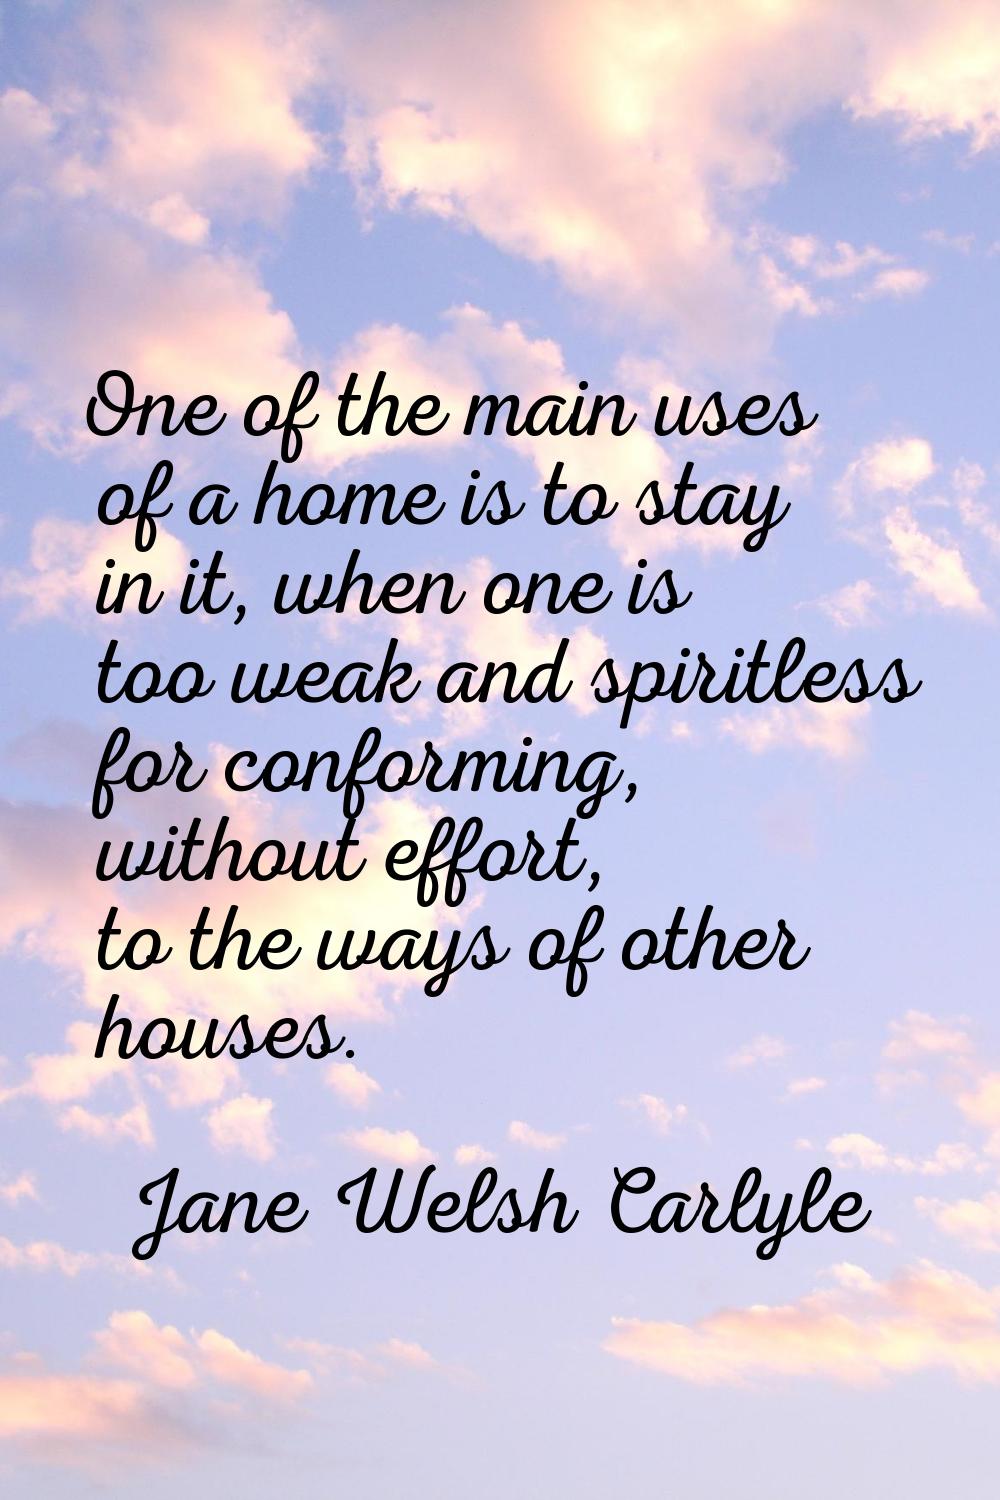 One of the main uses of a home is to stay in it, when one is too weak and spiritless for conforming